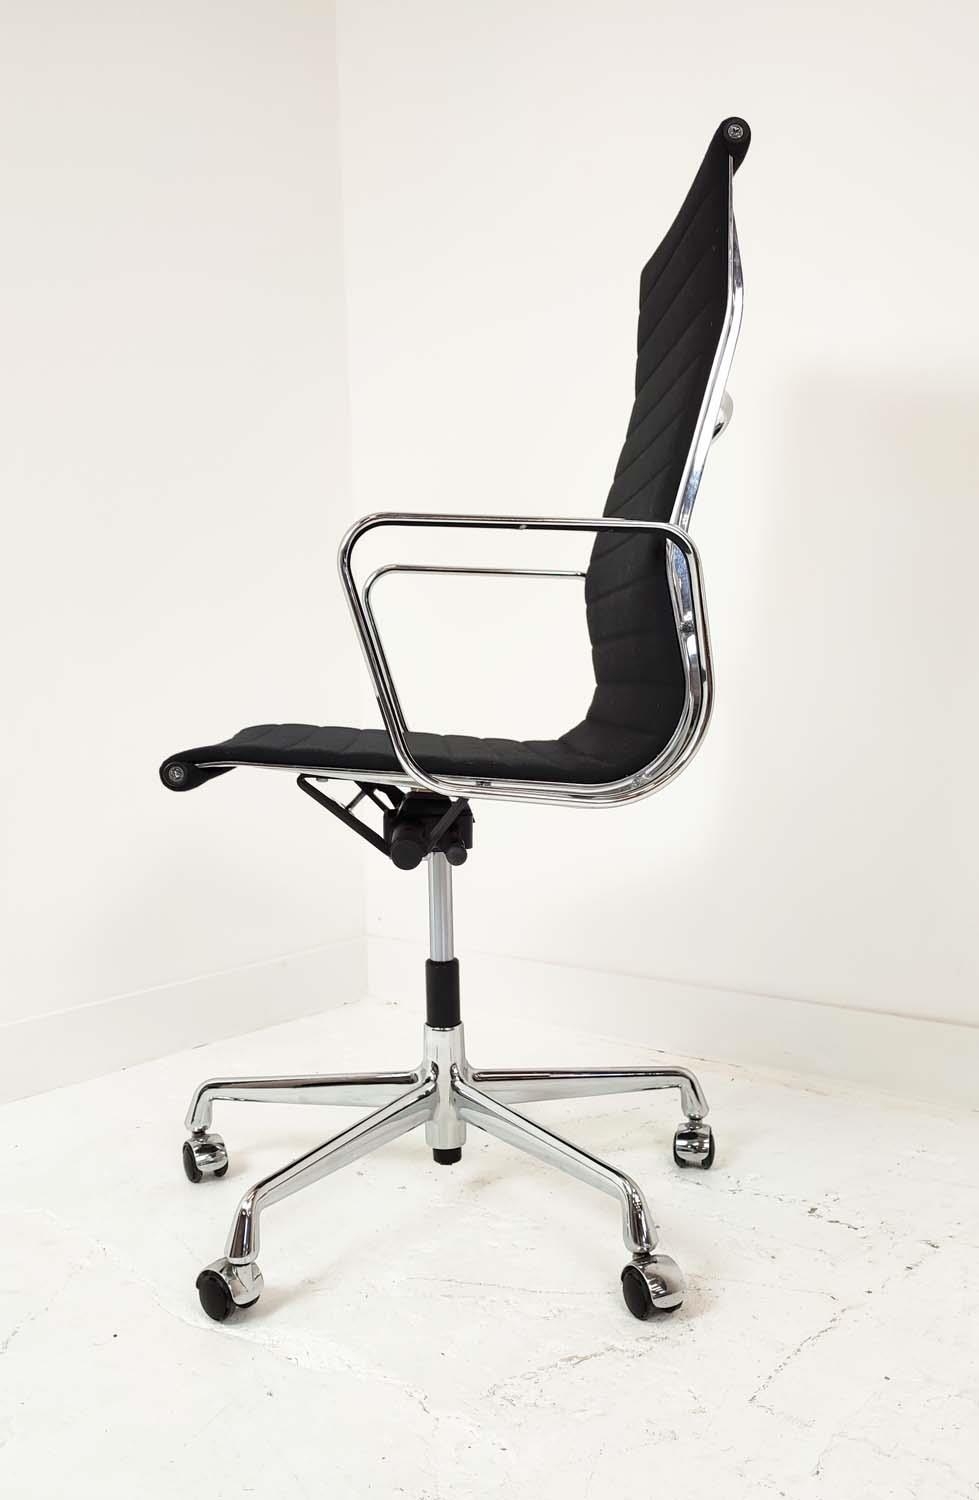 VITRA ALUMINIUM GROUP CHAIR, by Charles and Ray Eames, 113.5cm H at largest. - Image 7 of 9